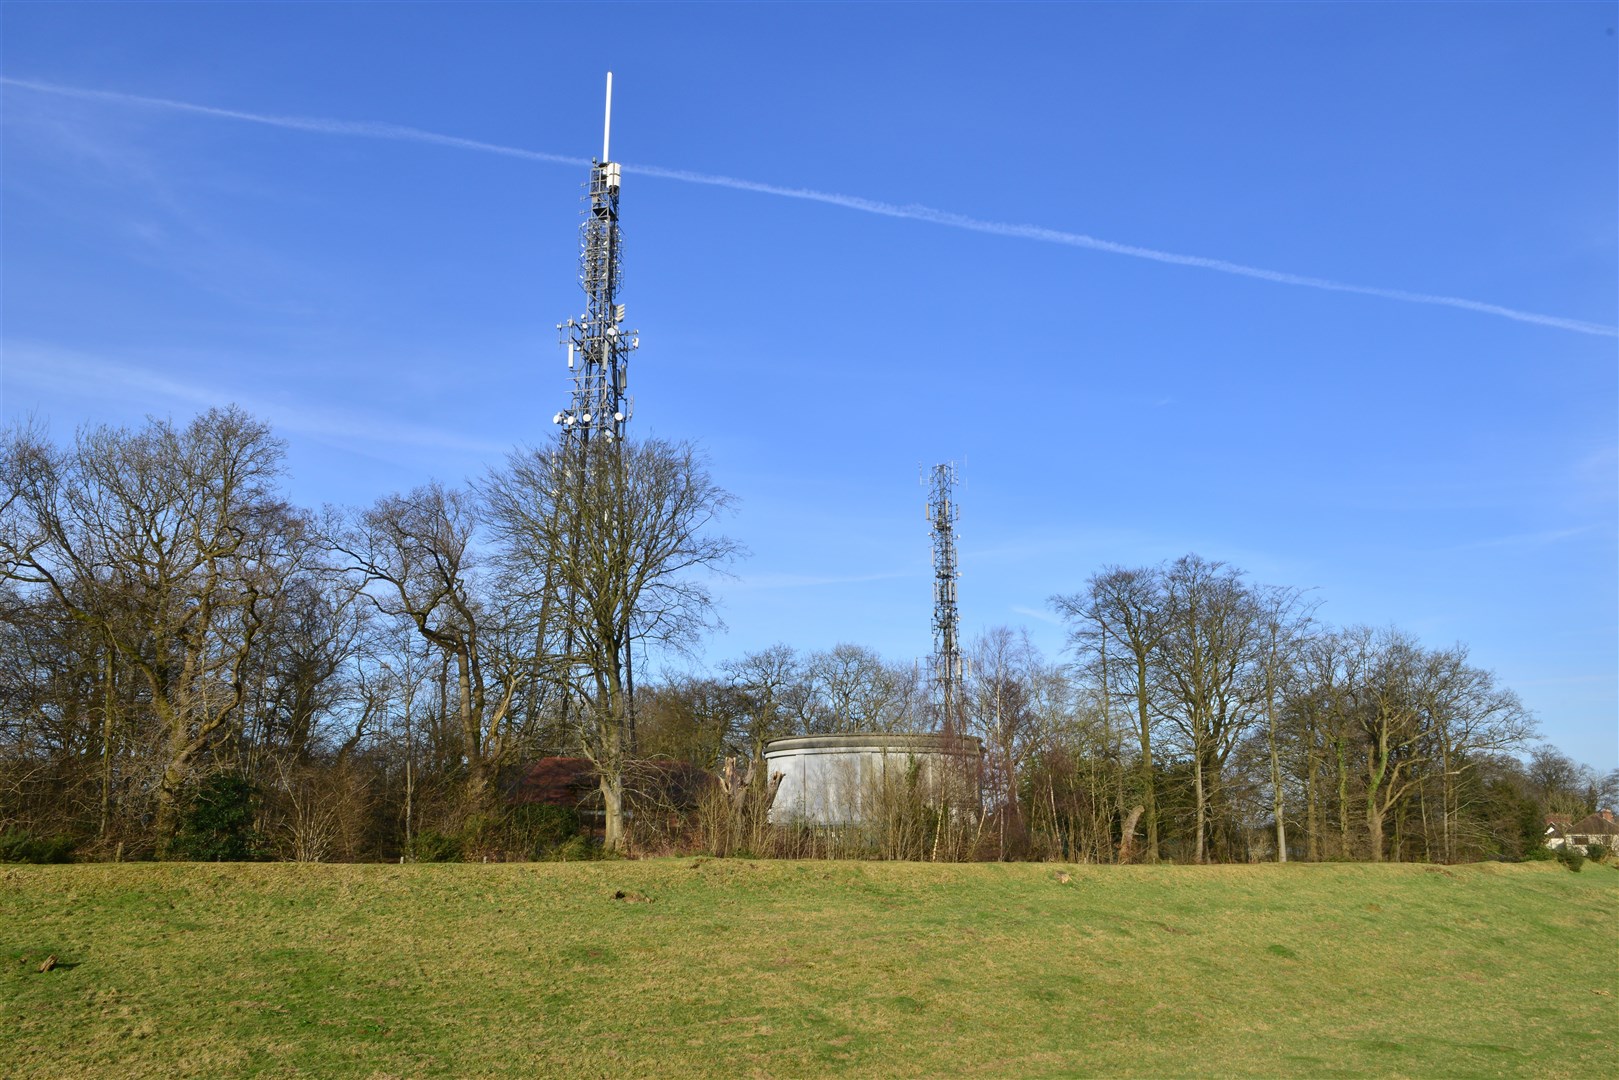 Mobile network providers will share their phone masts to allow for better coverage.